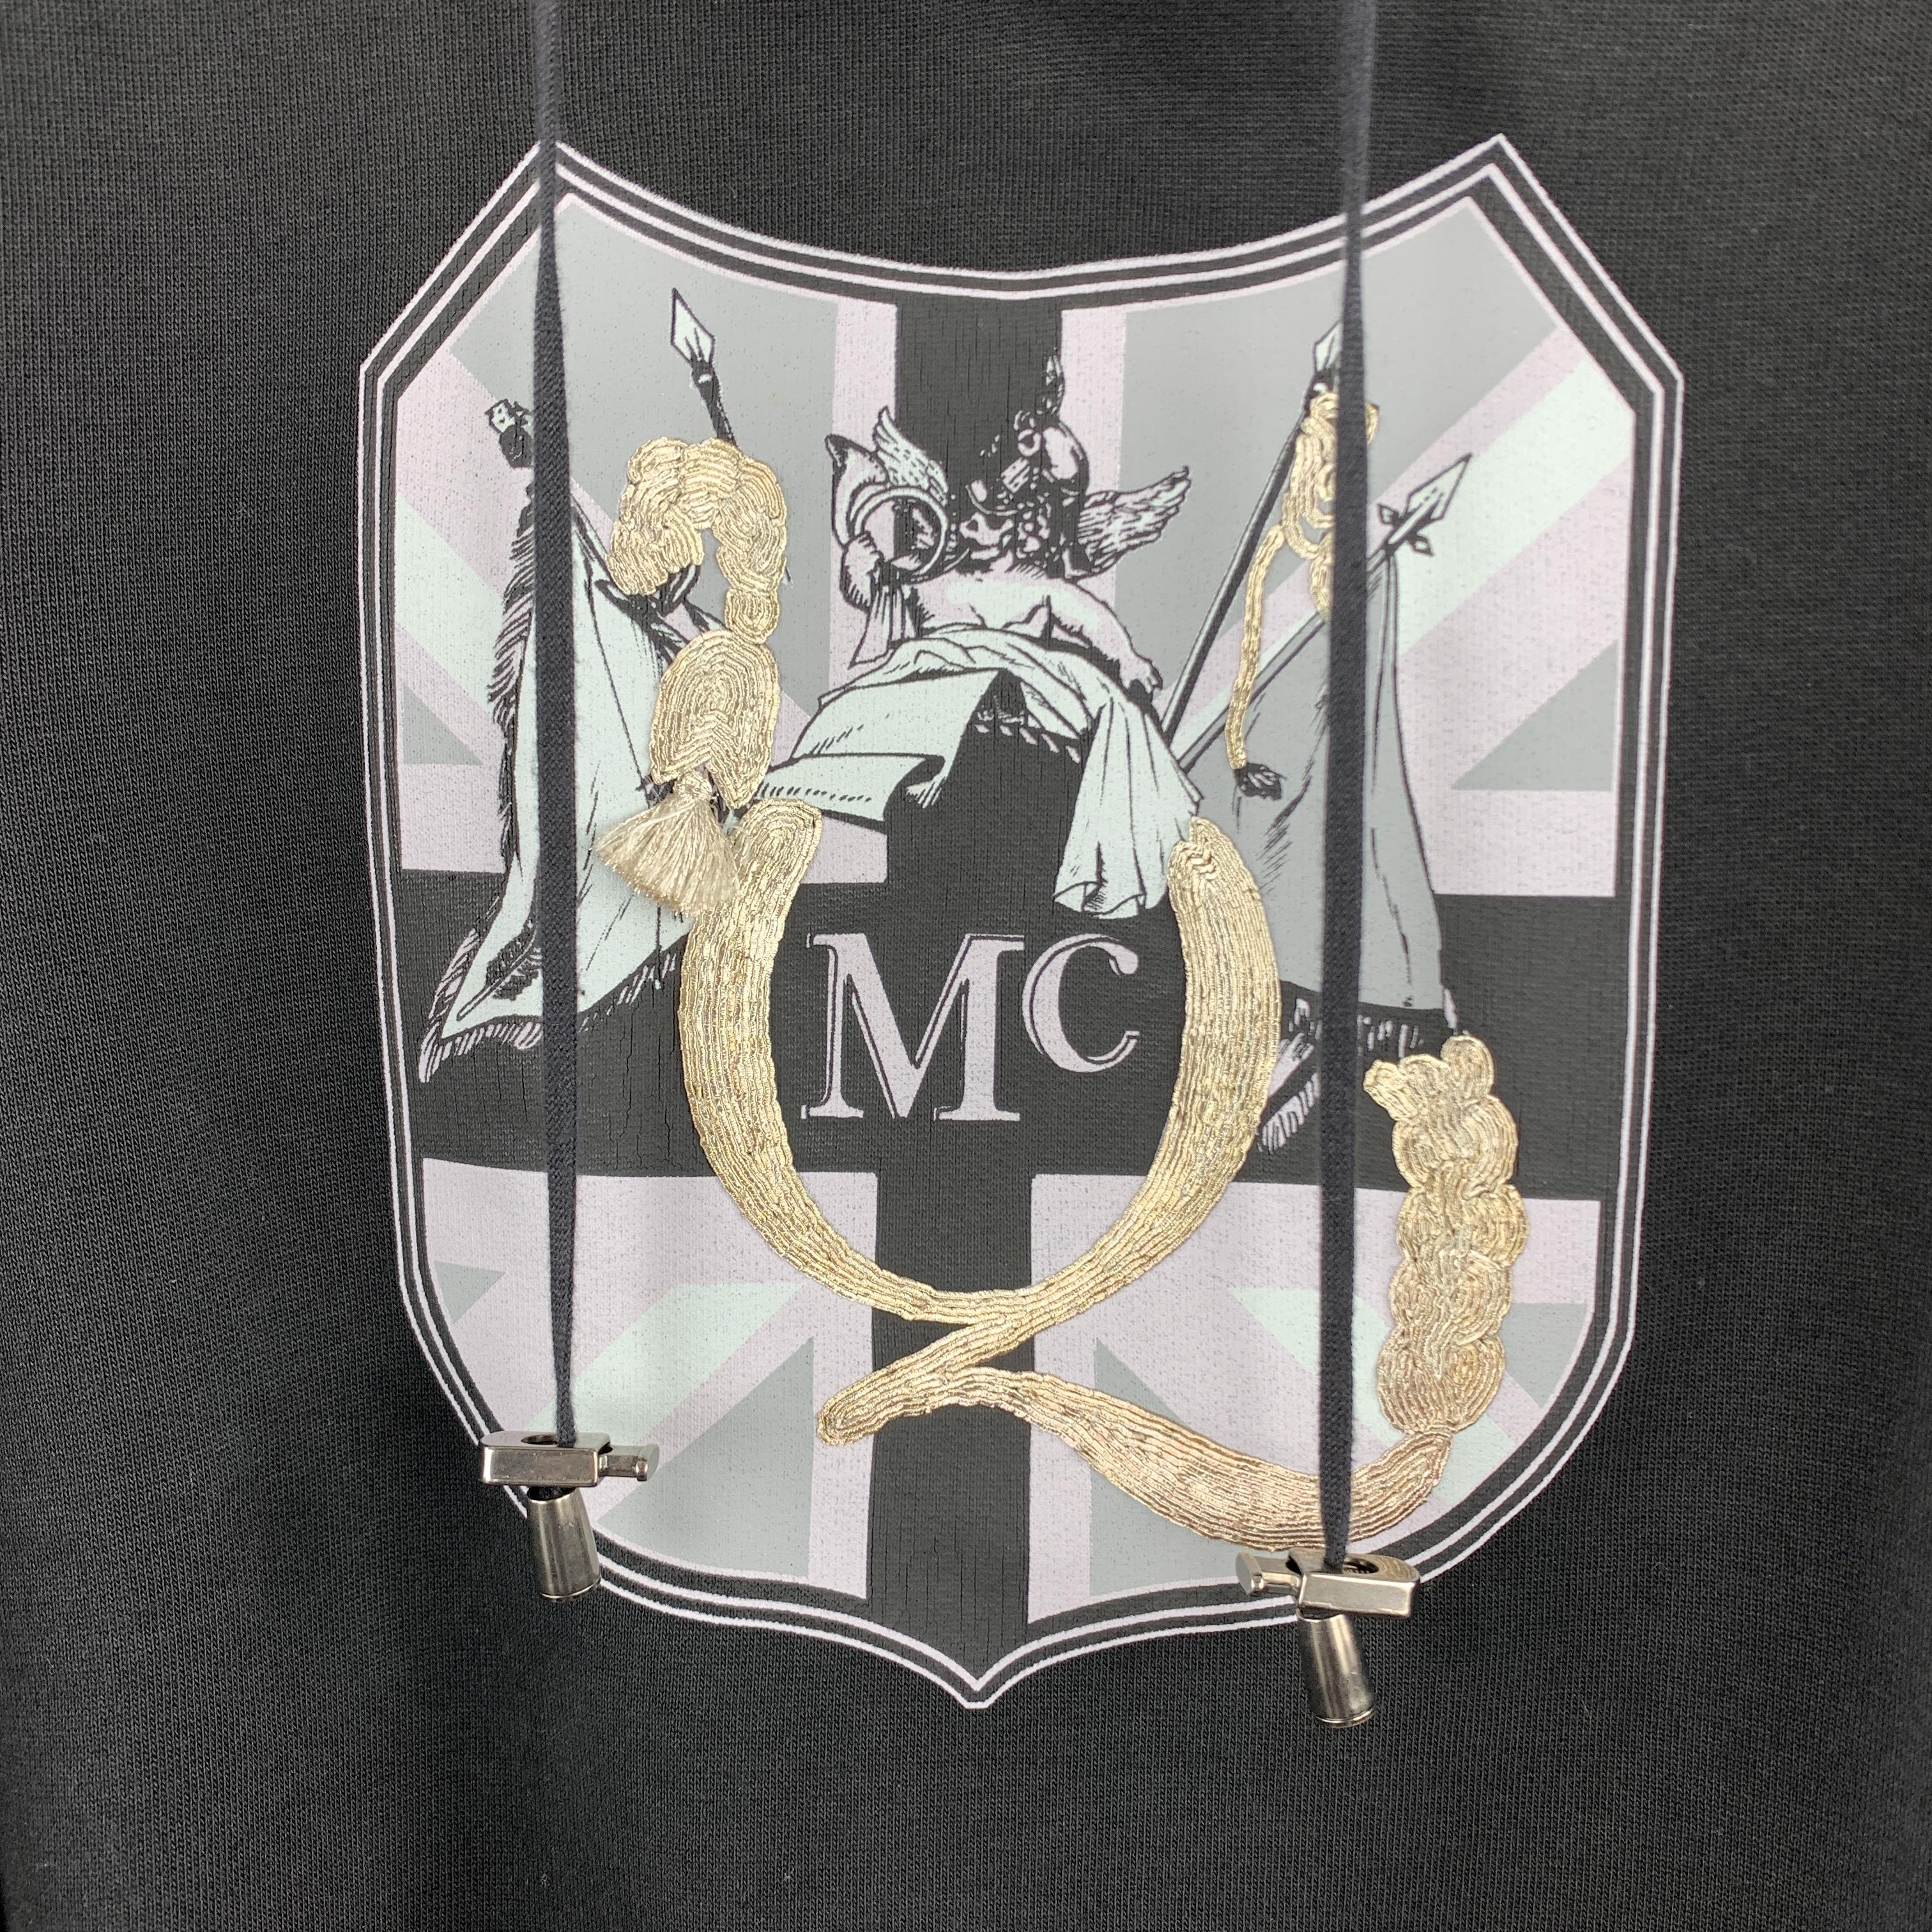 mcq meaning clothing